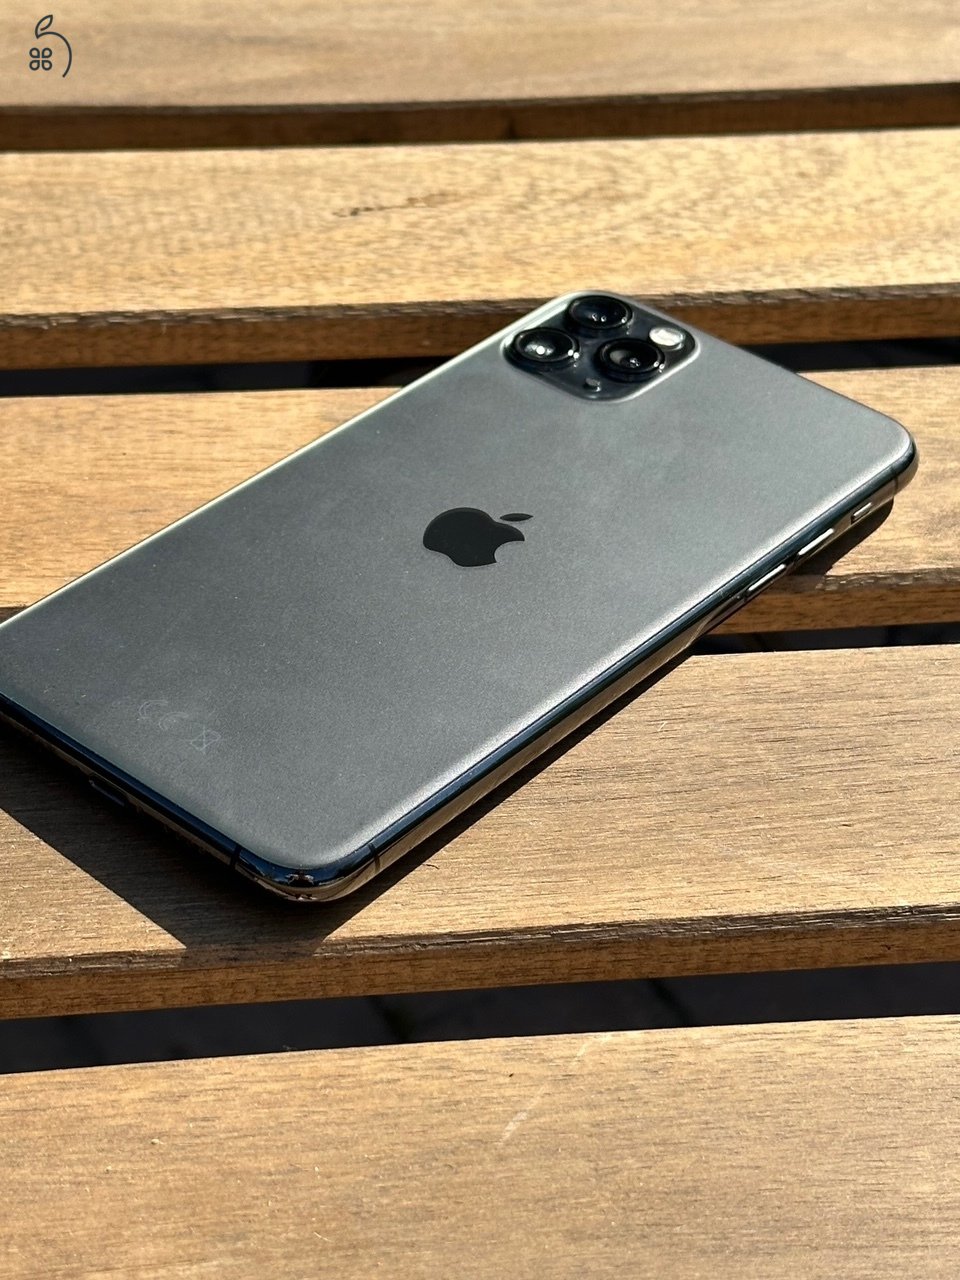 iPhone 11 Pro Max 64 GB Space Gray